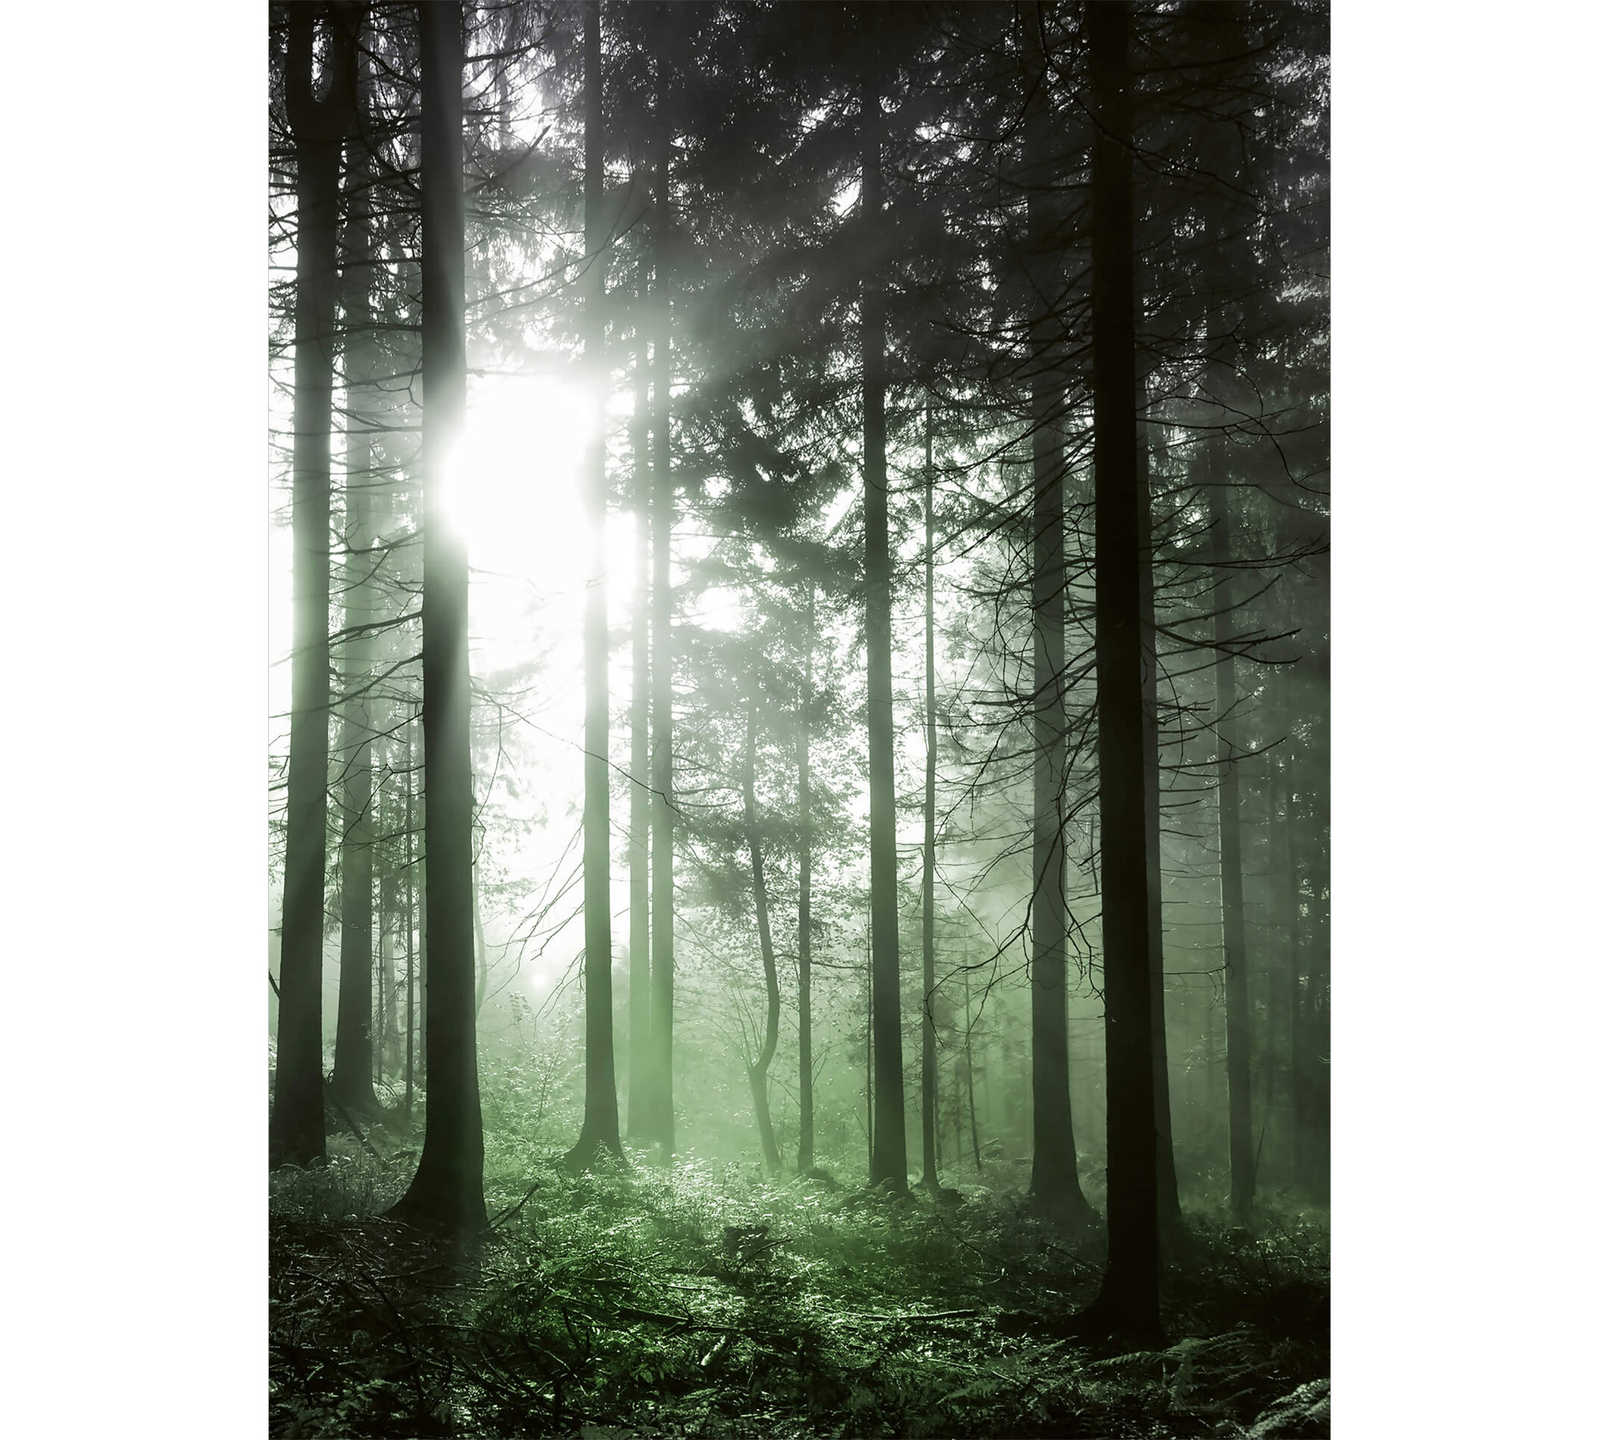         Photo wallpaper sunbeams in the forest - green, black, white
    